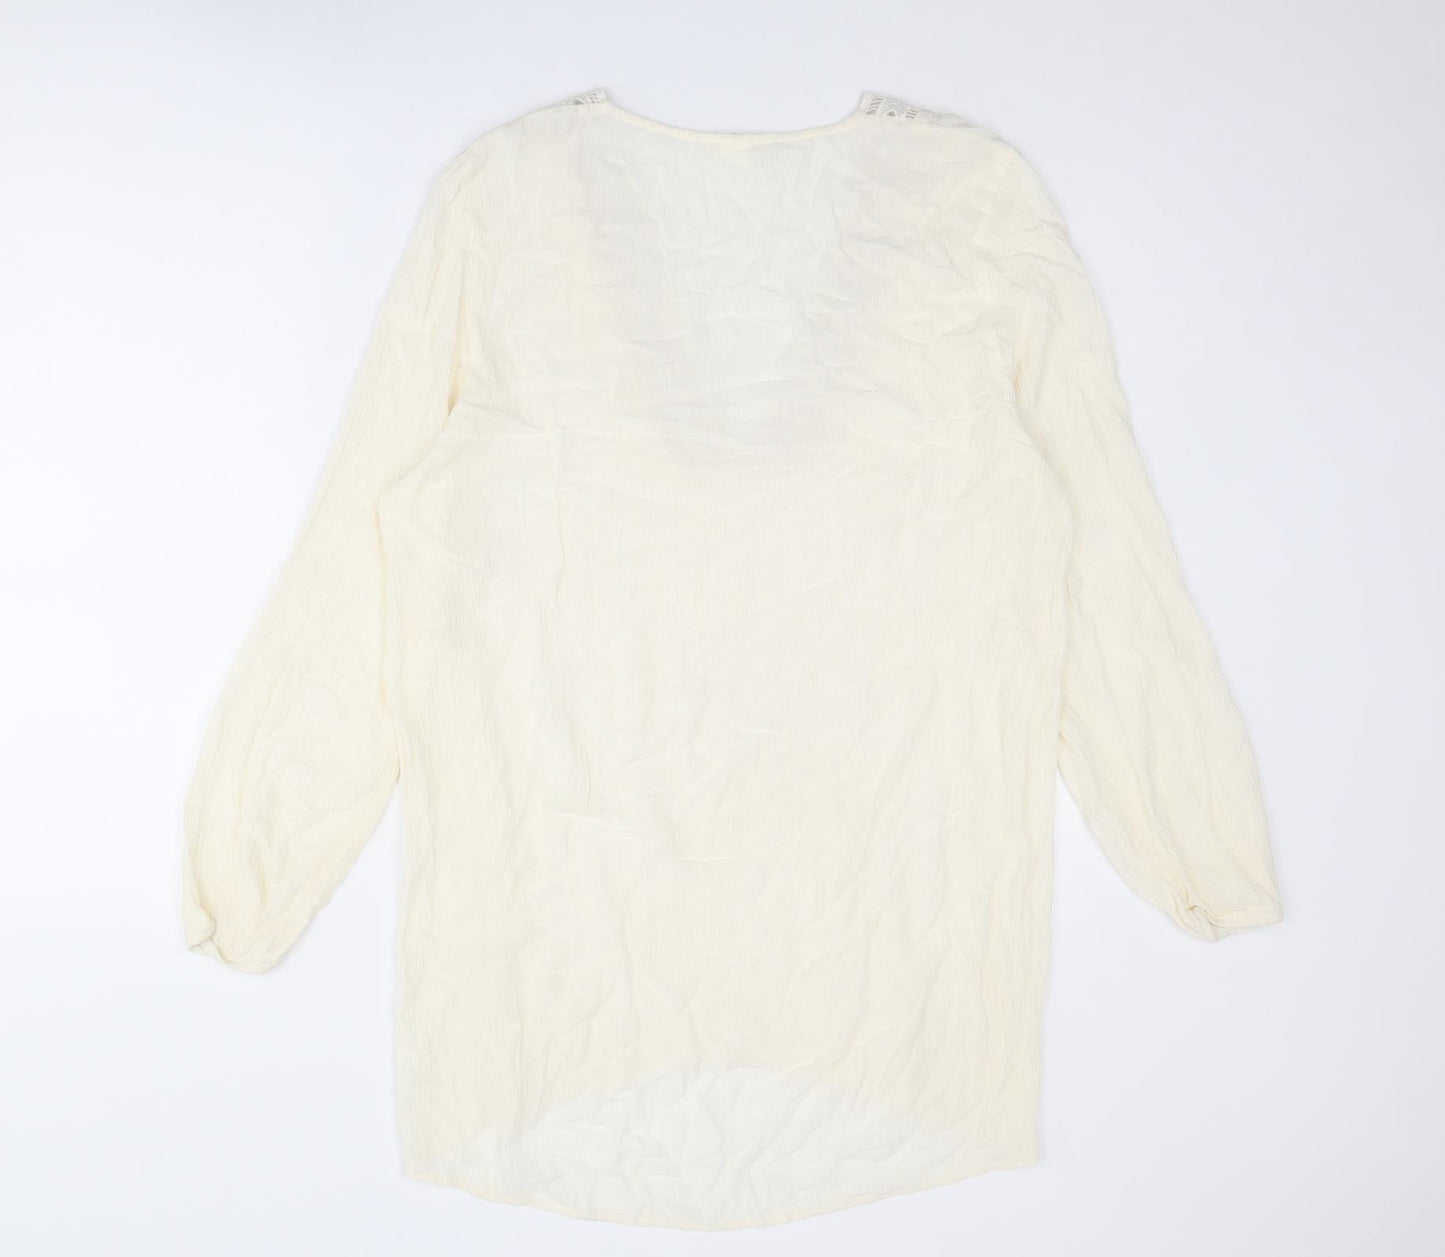 H&M Womens Ivory Polyester Tunic Blouse Size 10 V-Neck - Crocheted Lace Detail